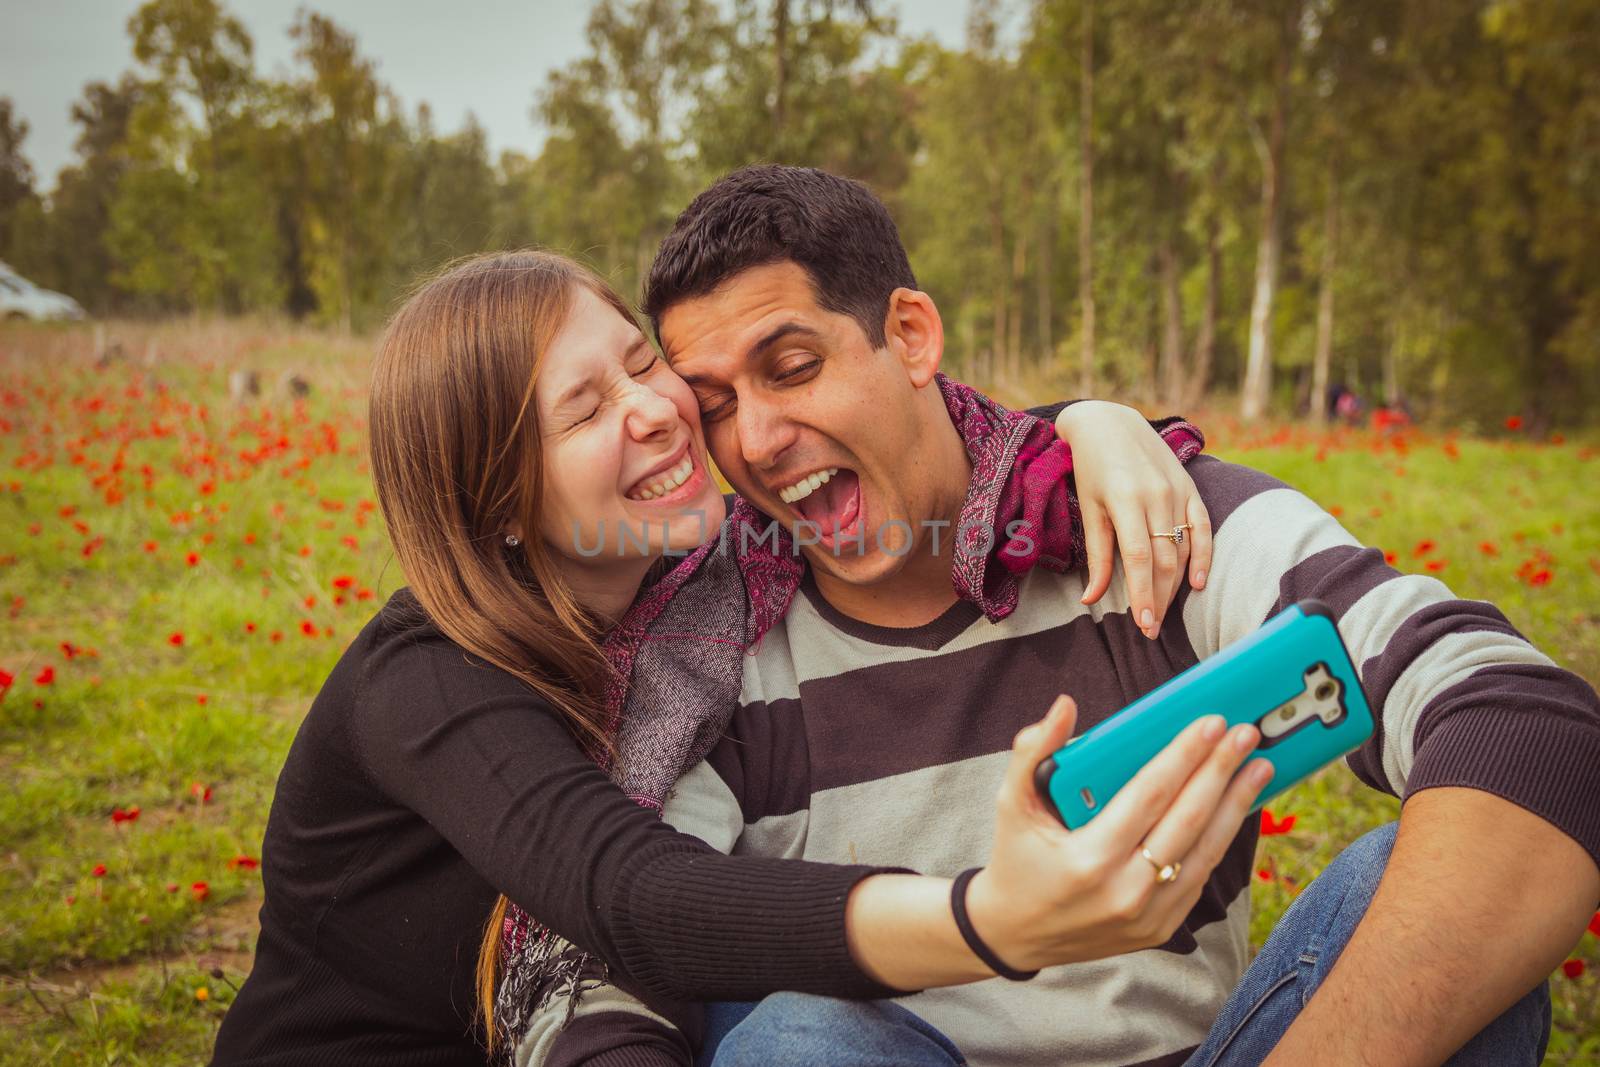 Couple doing silly and funny faces while taking selfie picture with their mobile phone in field of red poppies.